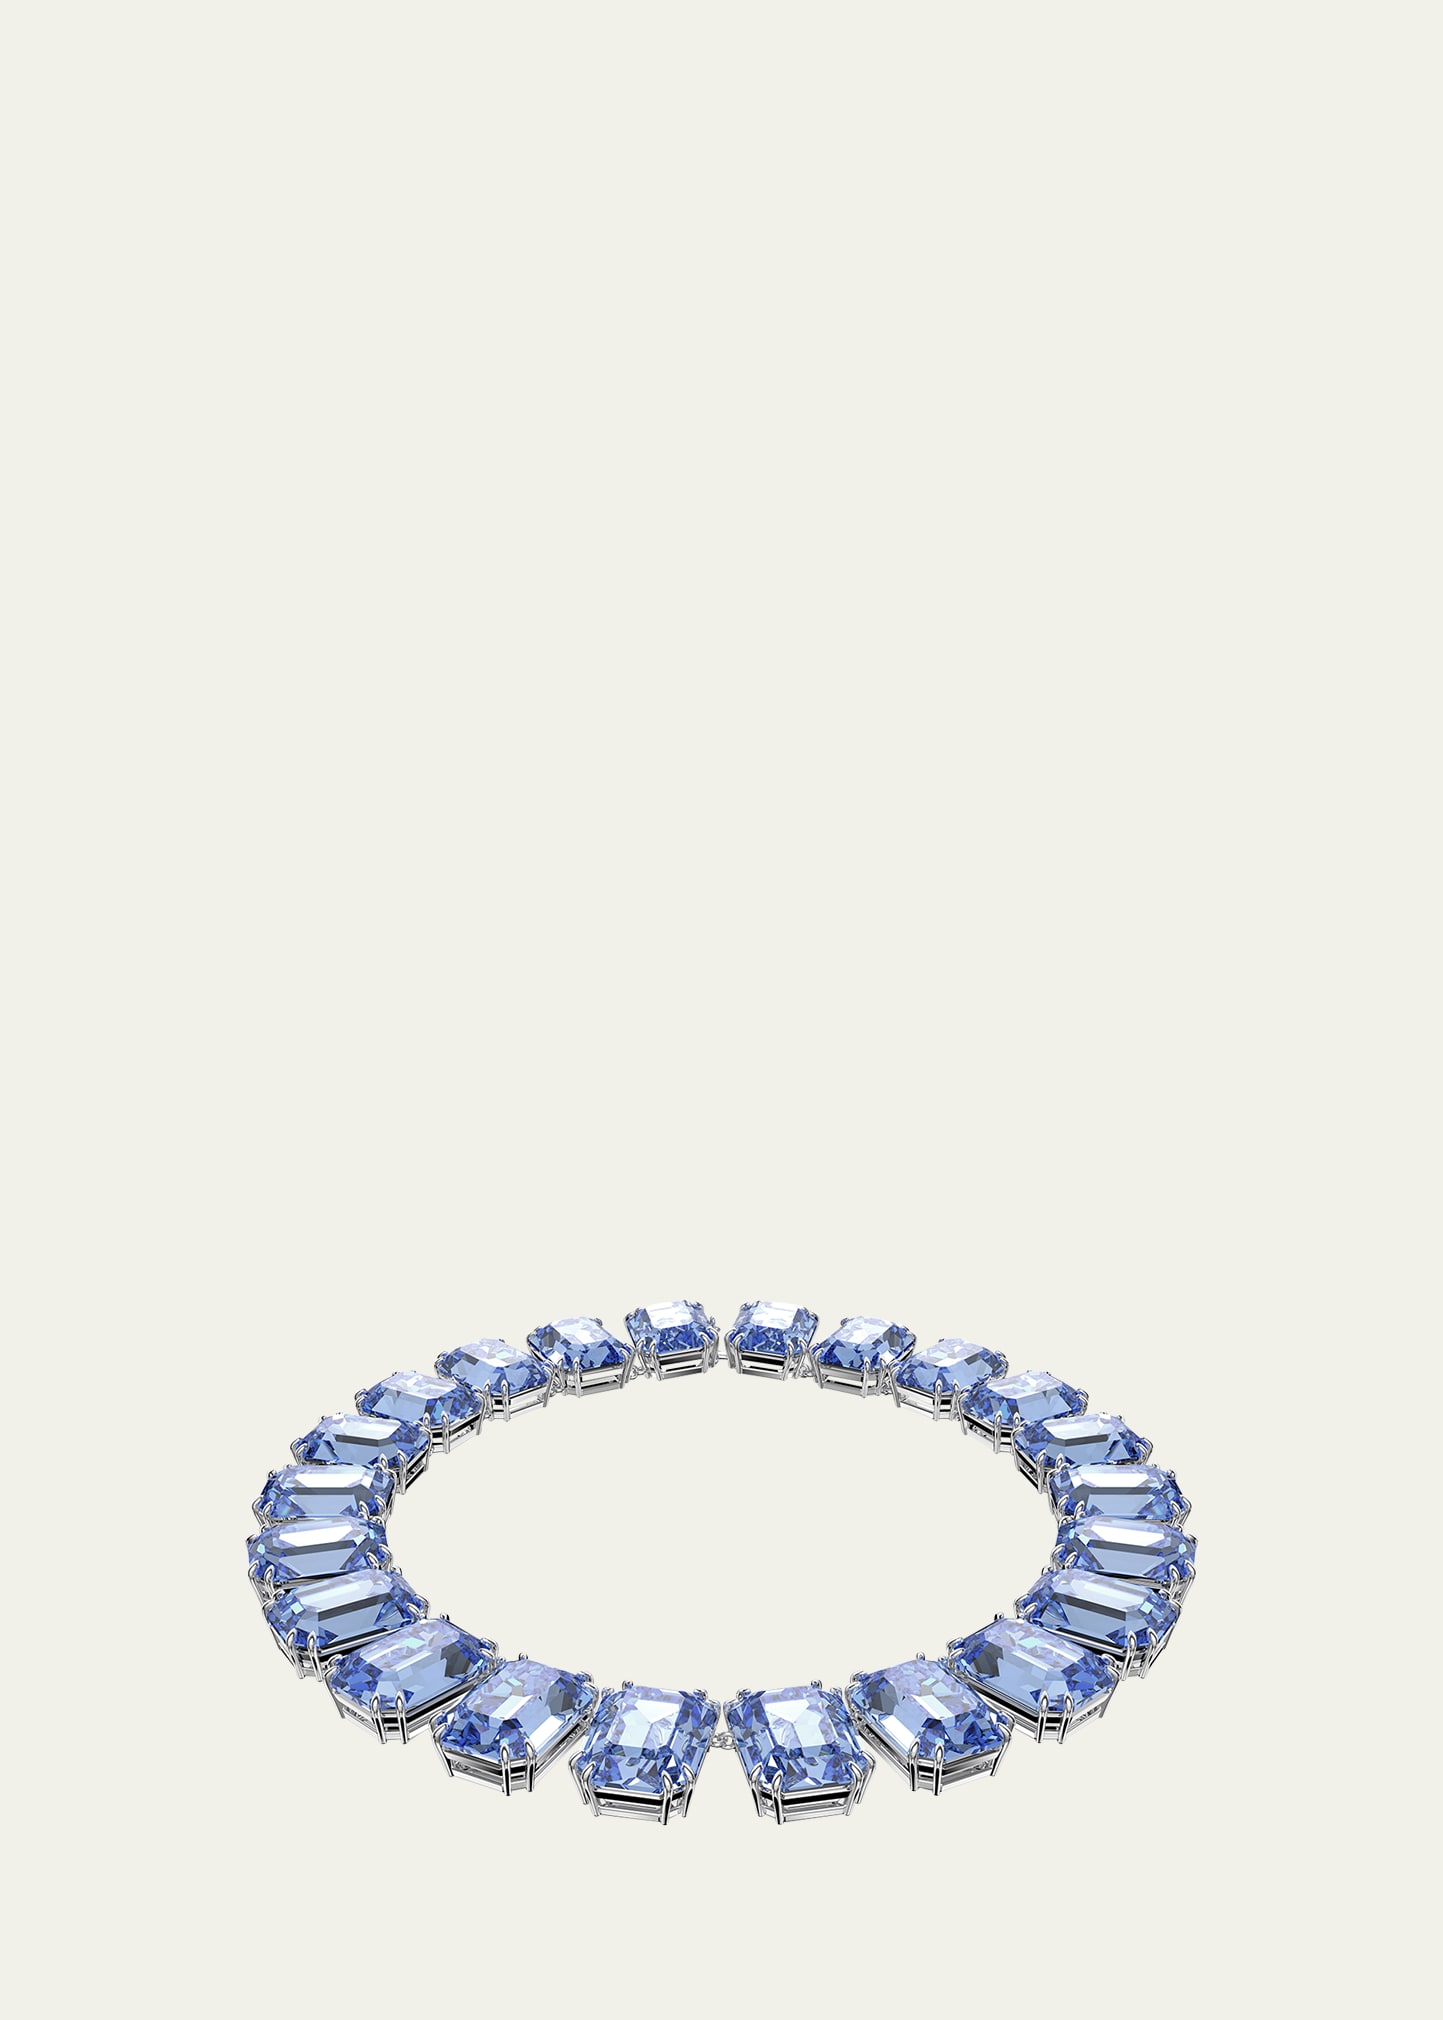 Millenia Necklace with Octagon-Cut Stones, Blue